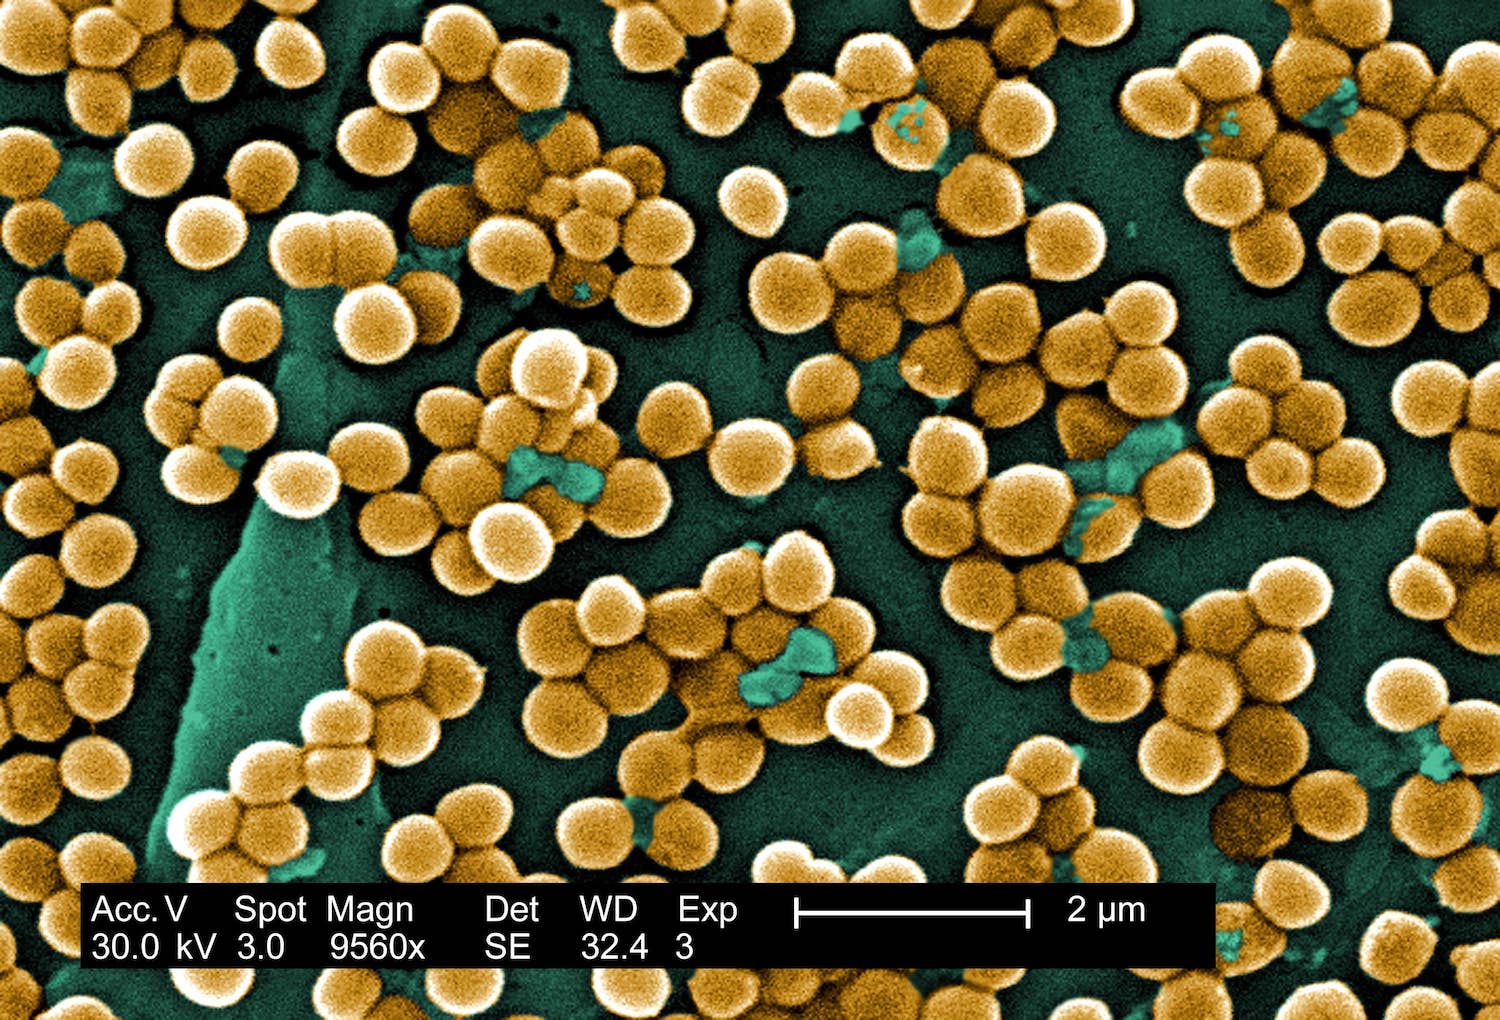 Digitally colorized scanning electron microscopic (SEM) of Staphylococcus aureus bacteria. Copyright holder: Janice Haney Carr. Link: https://phil.cdc.gov/Details.aspx?pid=10046.